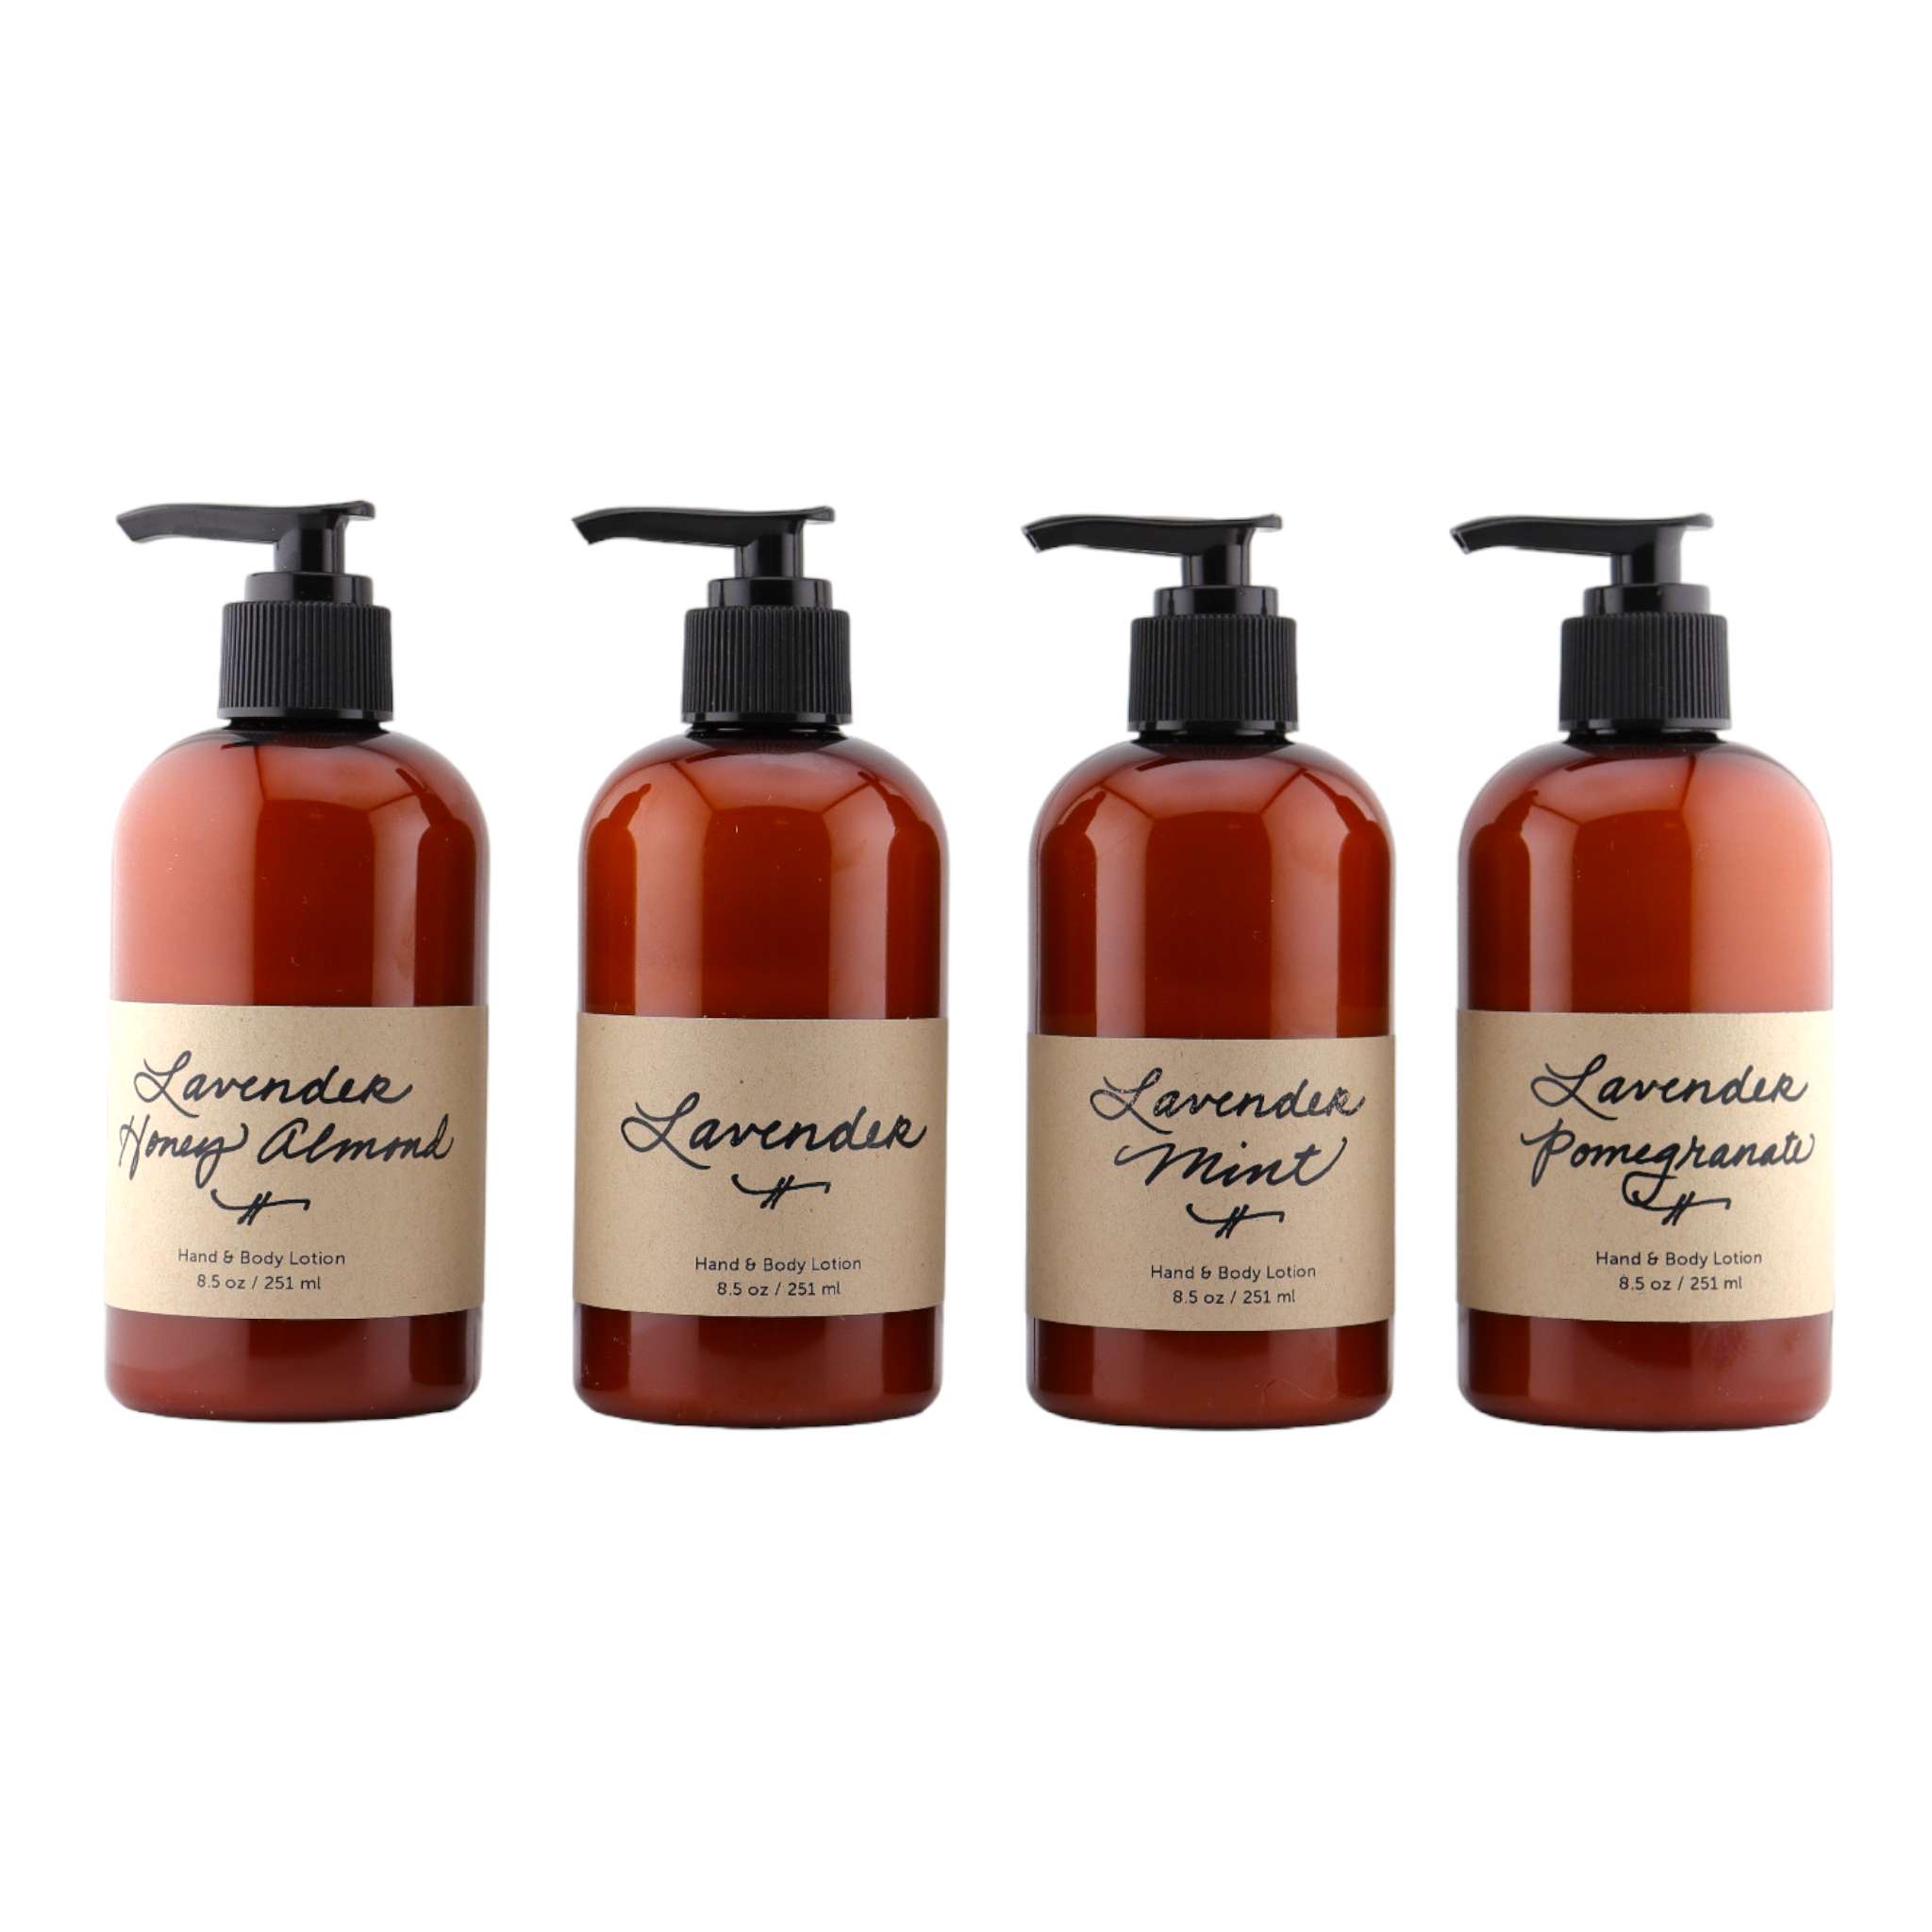 Lavender and Pomegranate Hand & Body Lotion - 8.5 oz